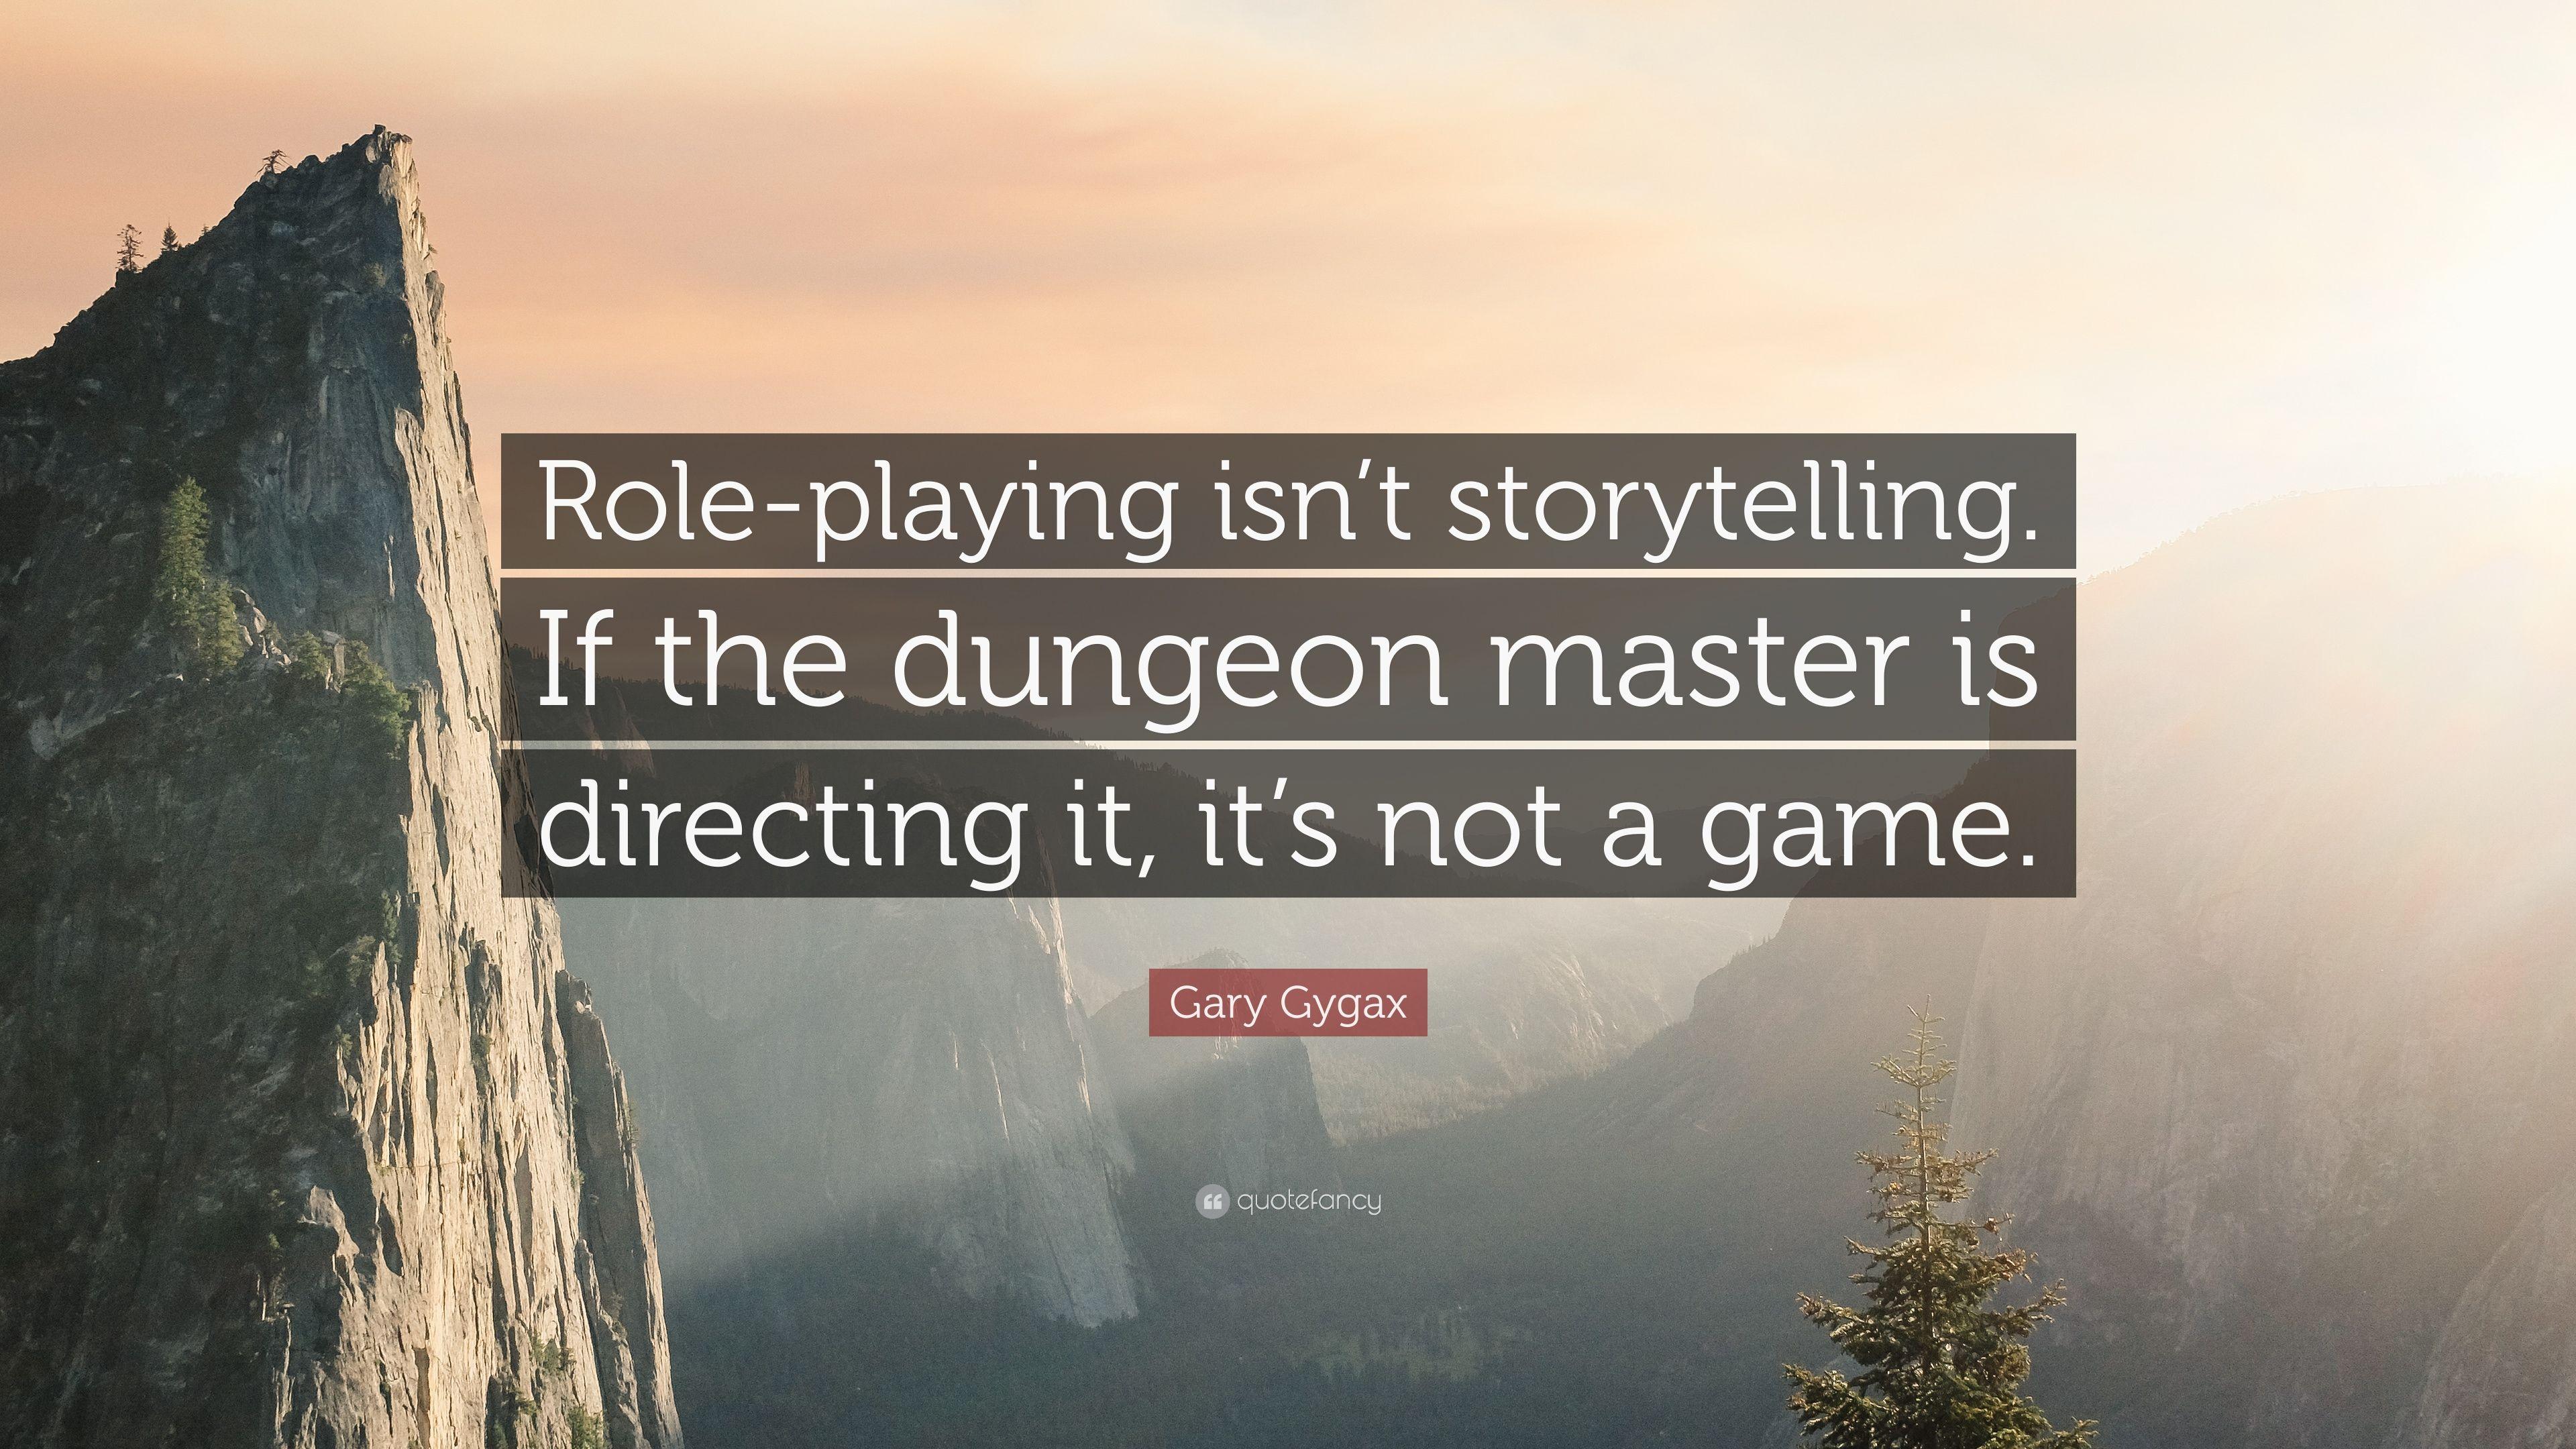 Gary Gygax Quote: “Role Playing Isn't Storytelling. If The Dungeon